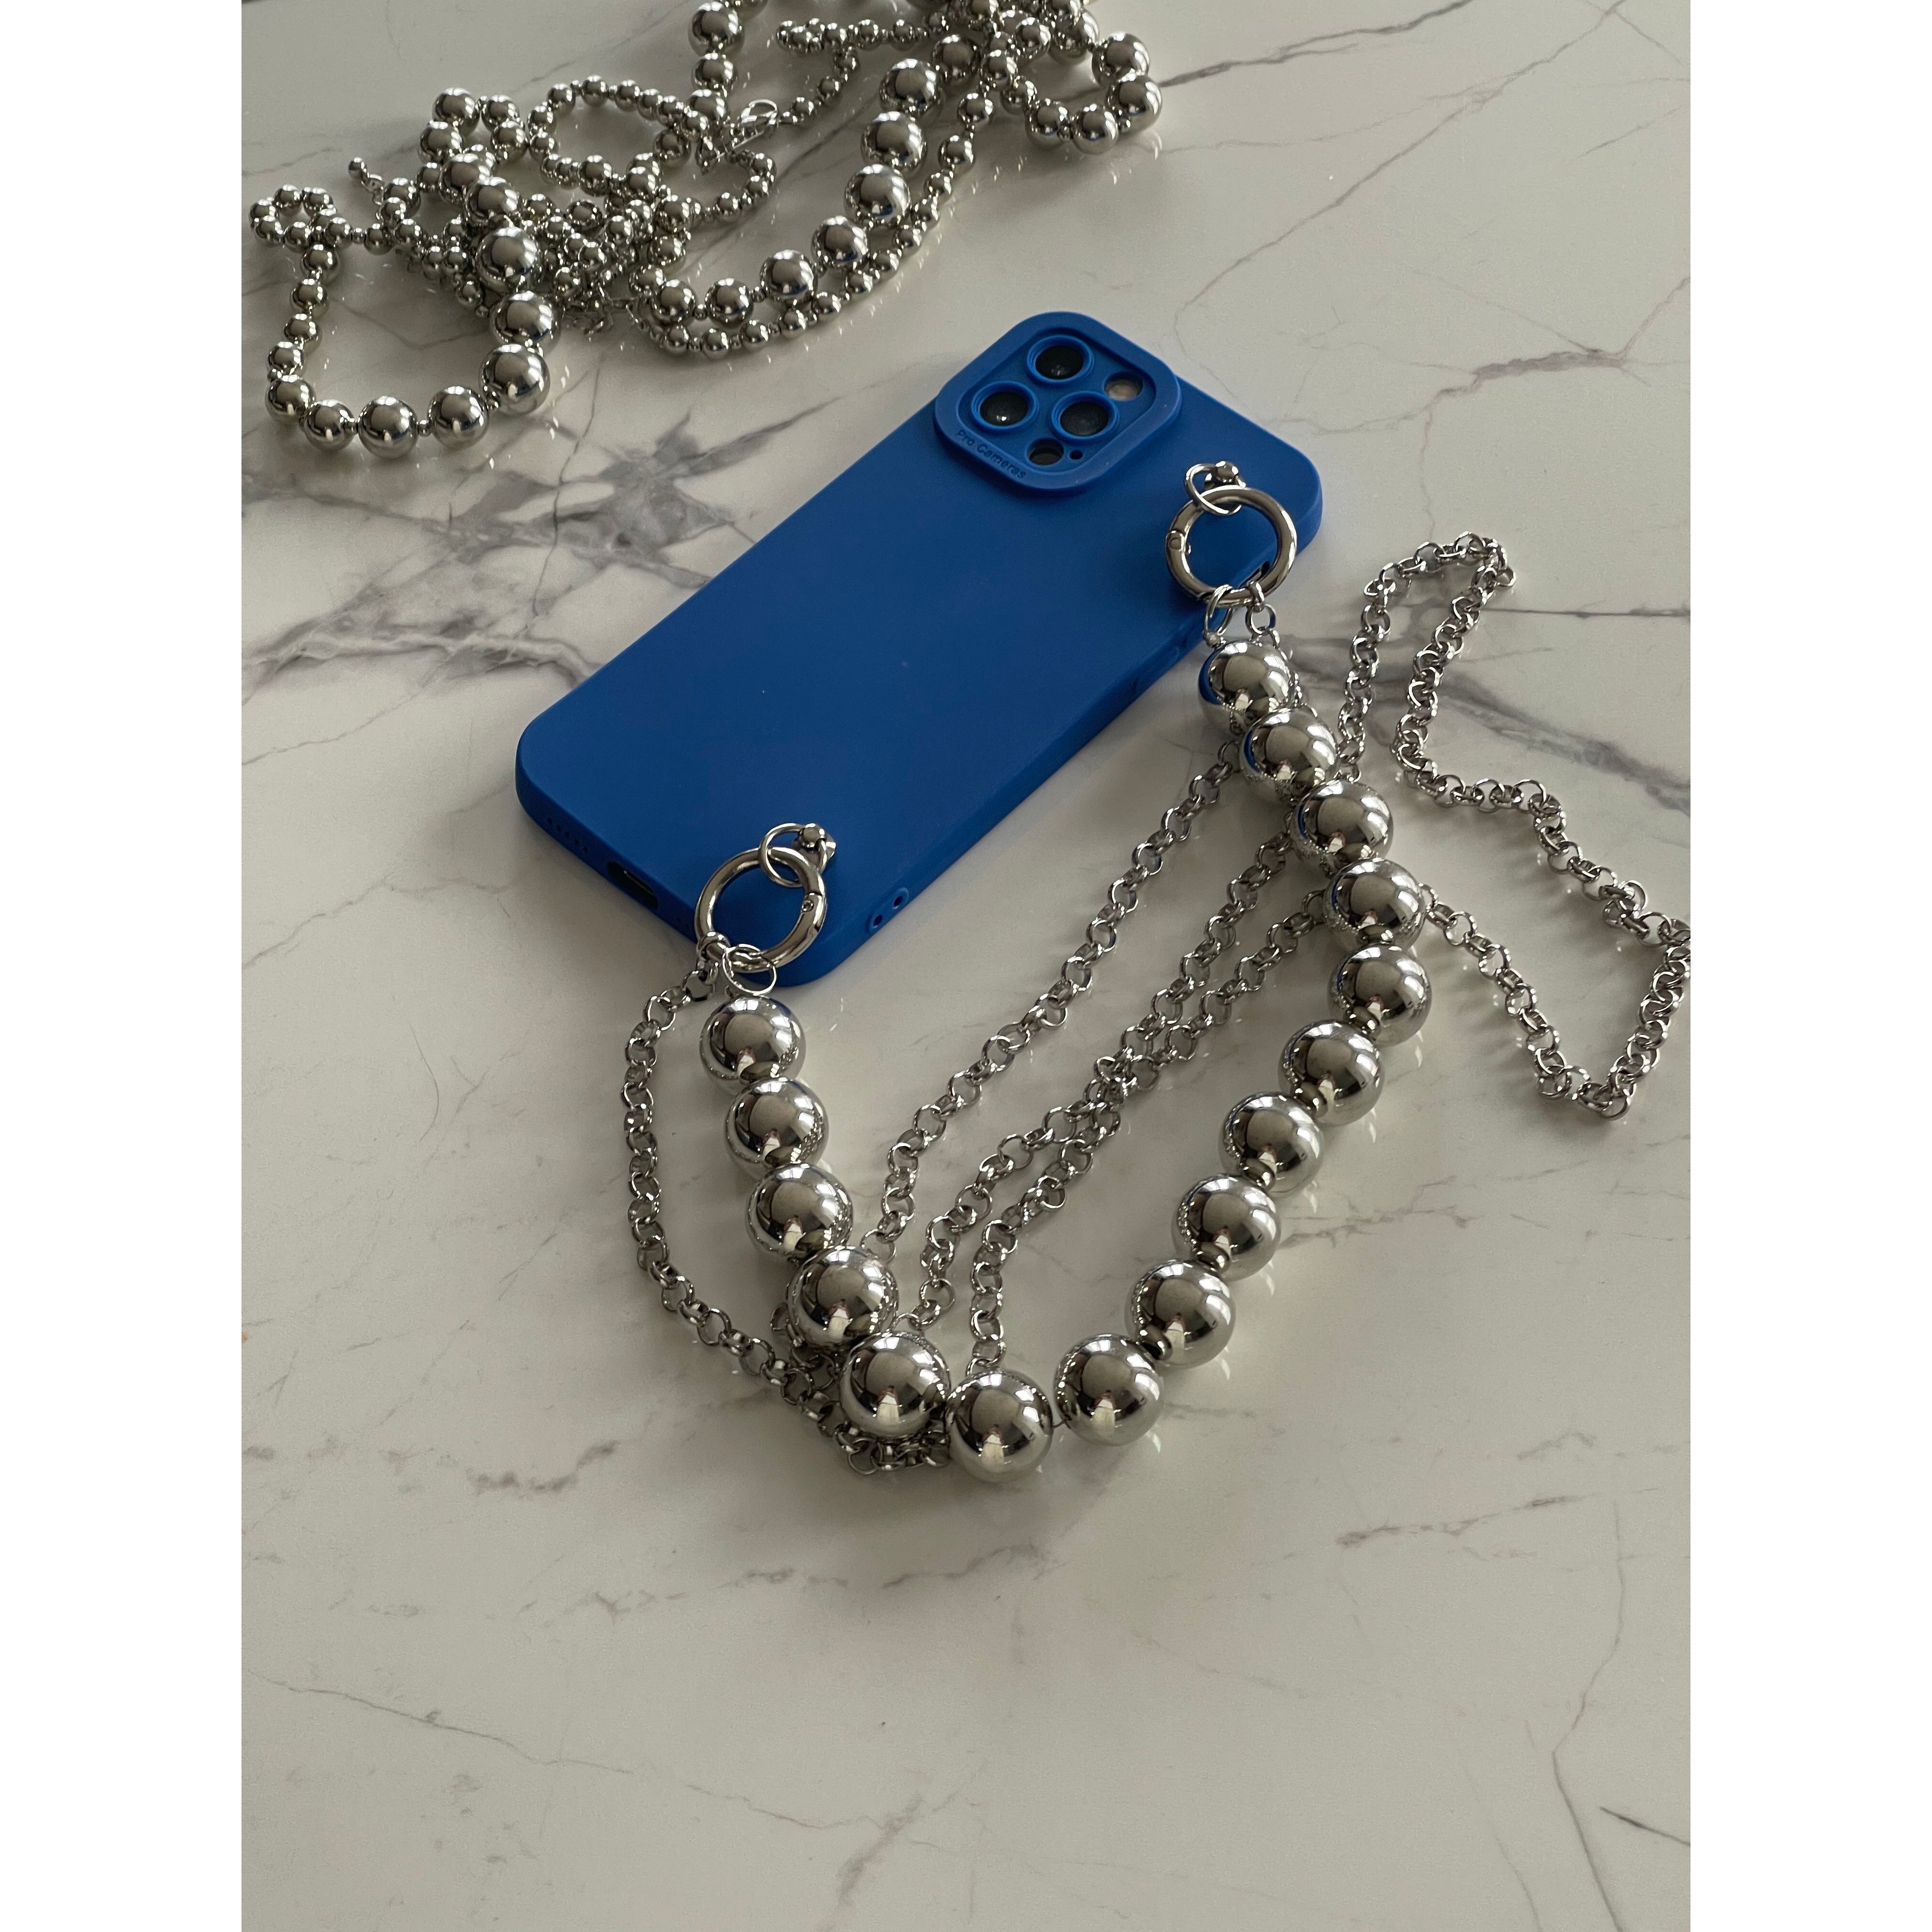 Blue iPhone Case With Silver Beads Strap